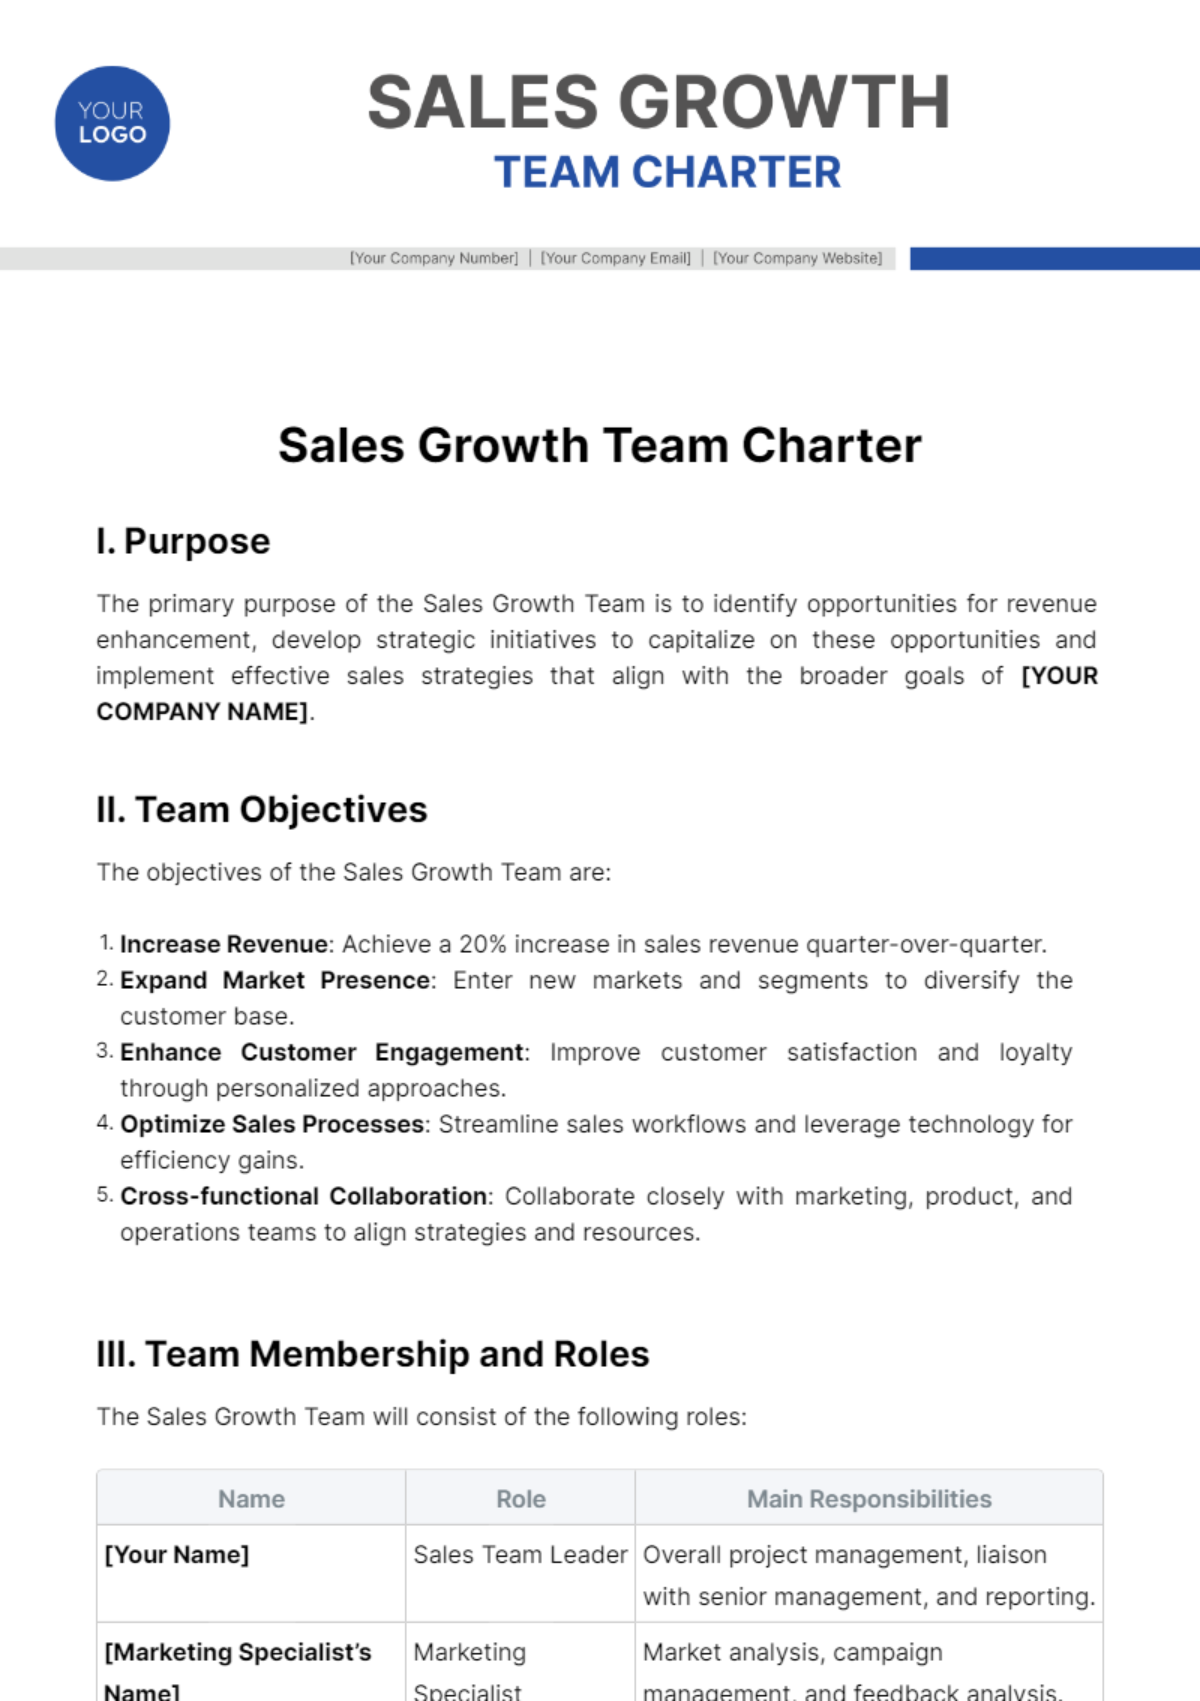 Sales Growth Team Charter Template